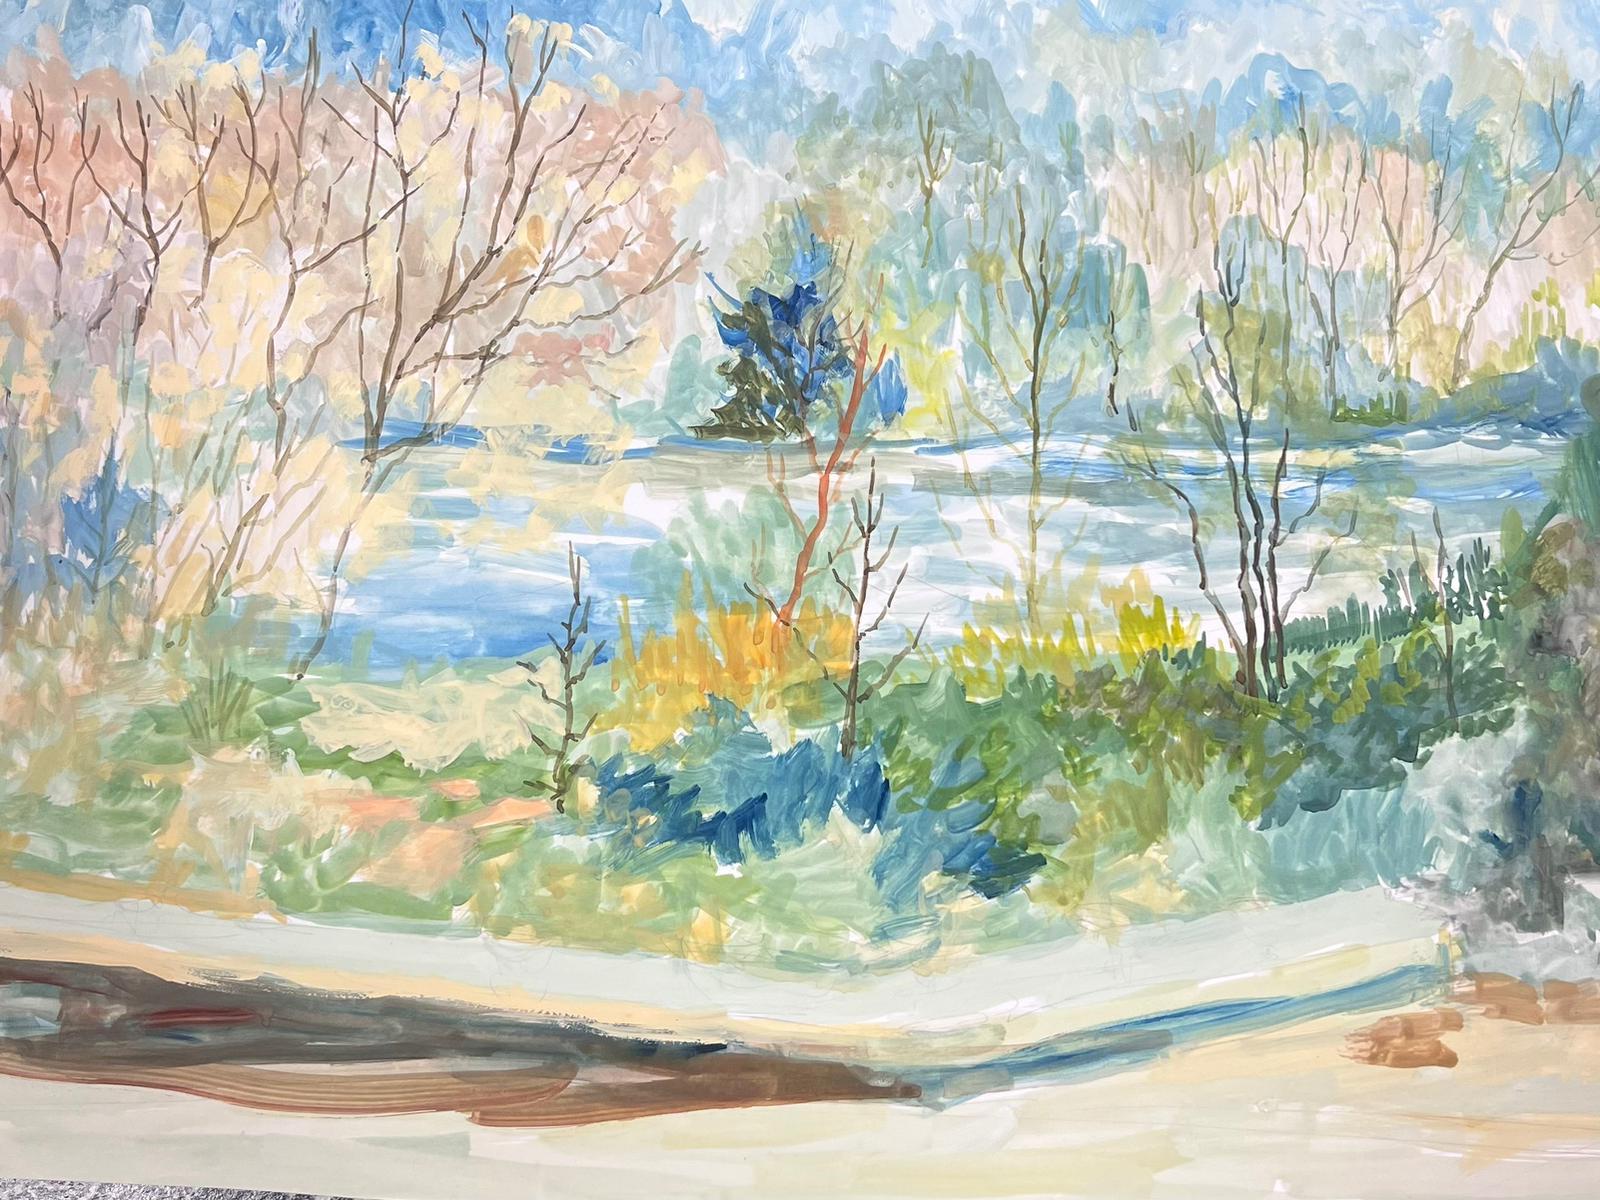 French Landscape
by Bernard Labbe (French mid 20th century) 
original gouache on artist paper
size: 13.5 x 18 inches
condition: very good and ready to be enjoyed

provenance: the artists atelier/ studio, France (stamped verso)